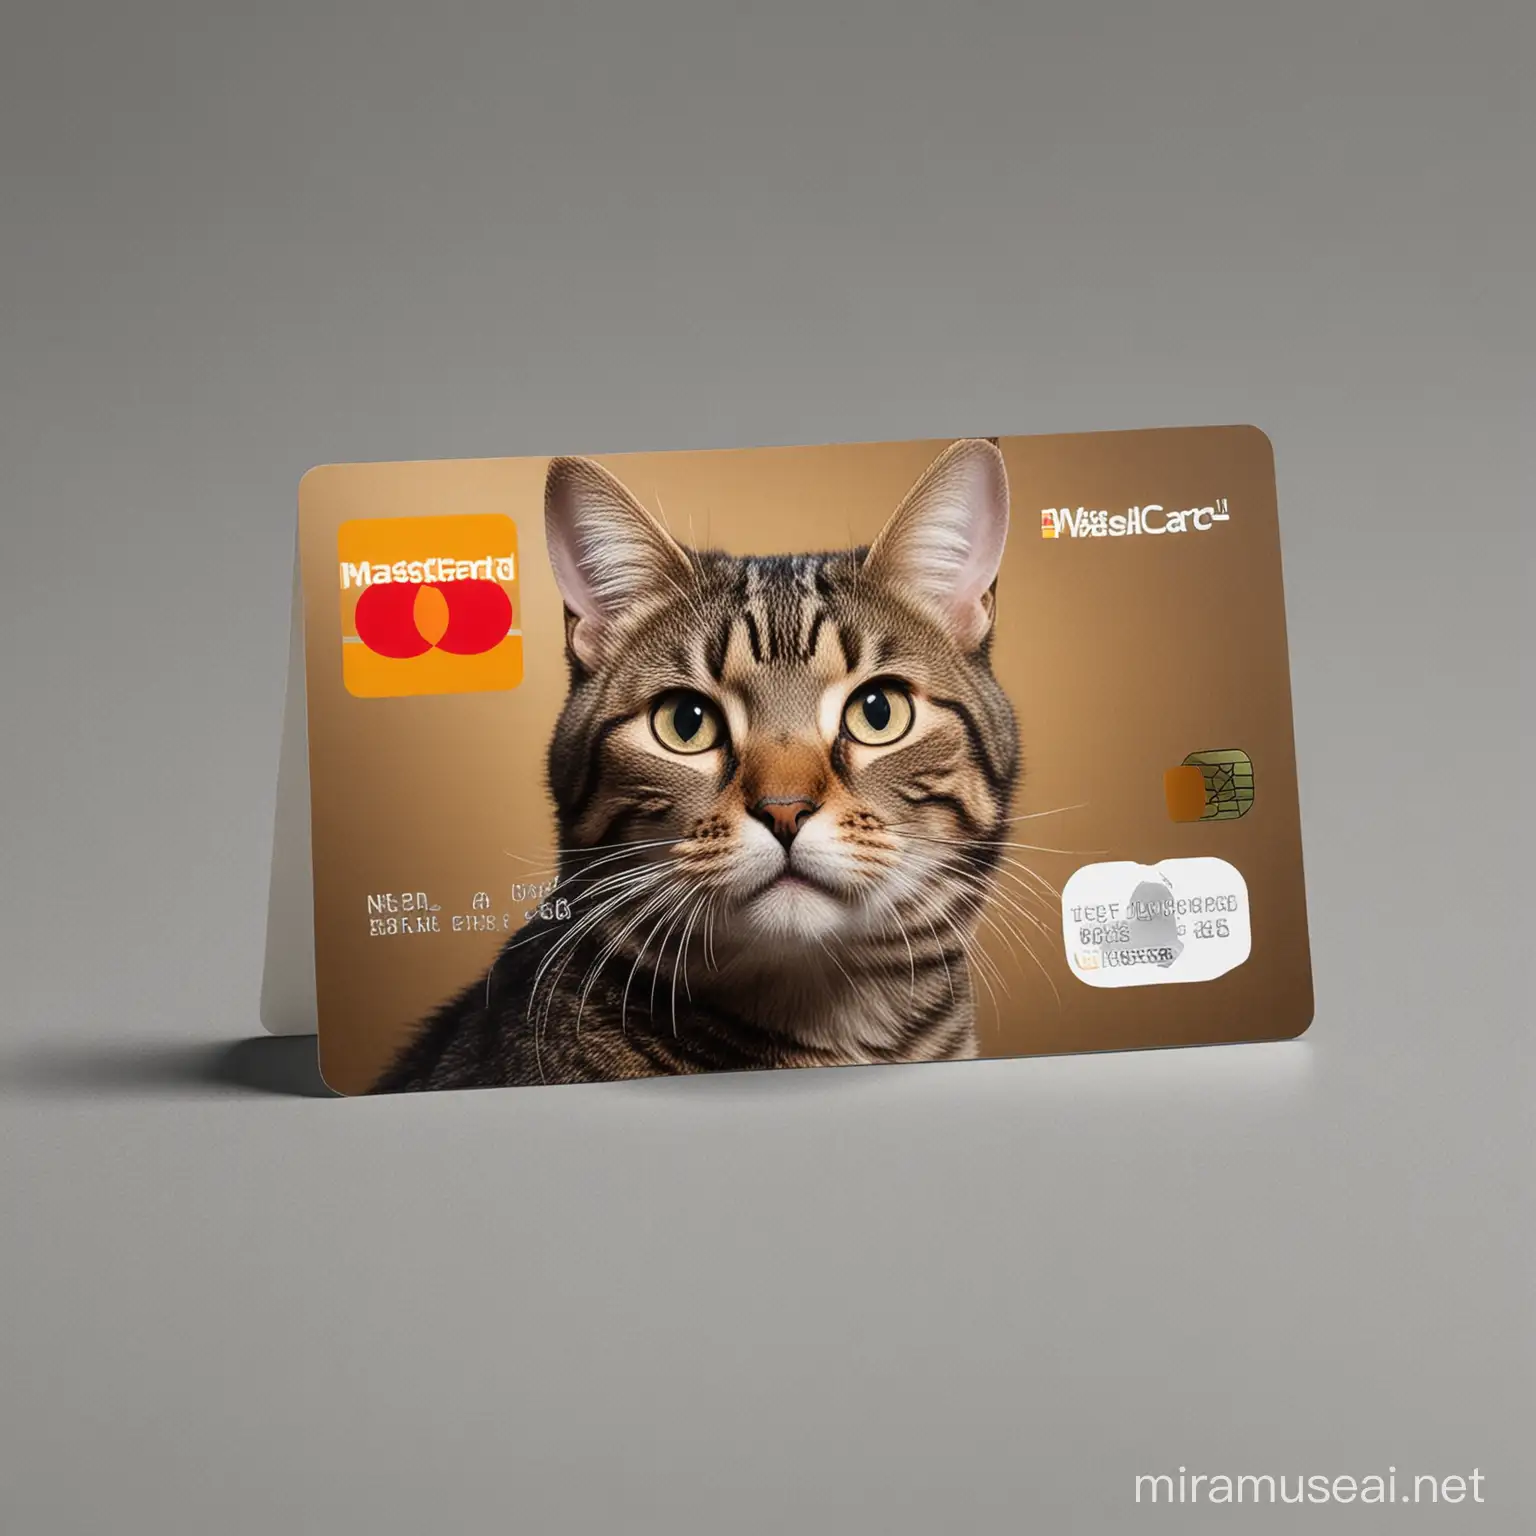 credit card, use a real card, with a real cat, put the cat on the card, and include tings to make the card look real, like use credit cat for the name on the card, and include mastercard logo